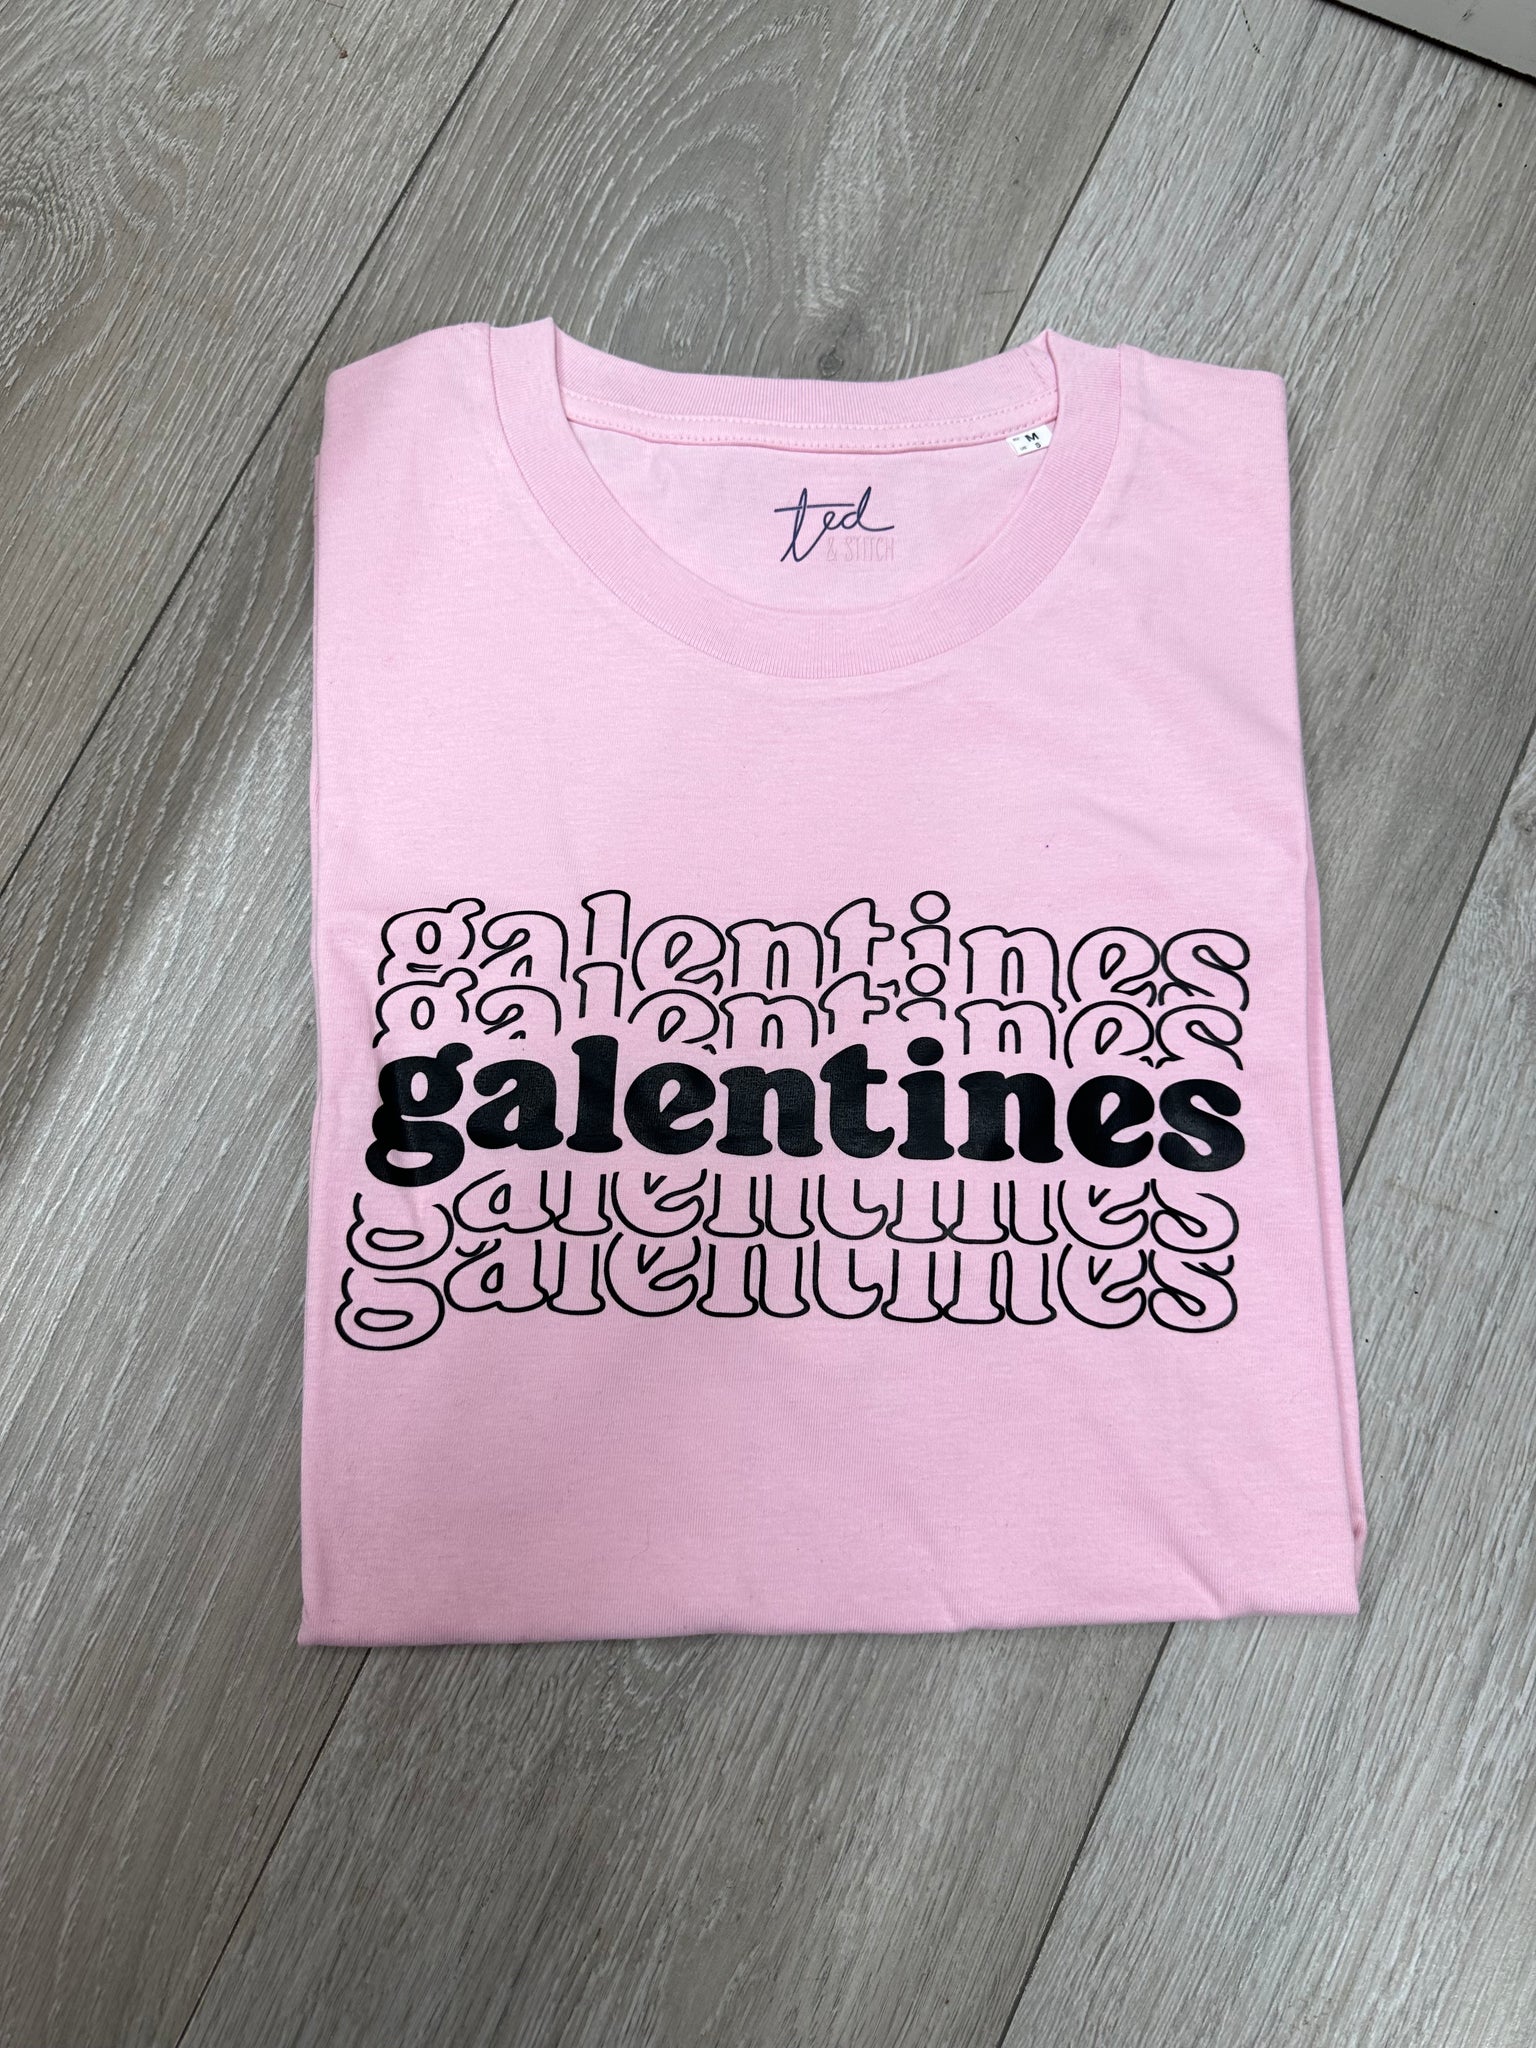 SAMPLE SALE Galentines Pink Tee Size S, M